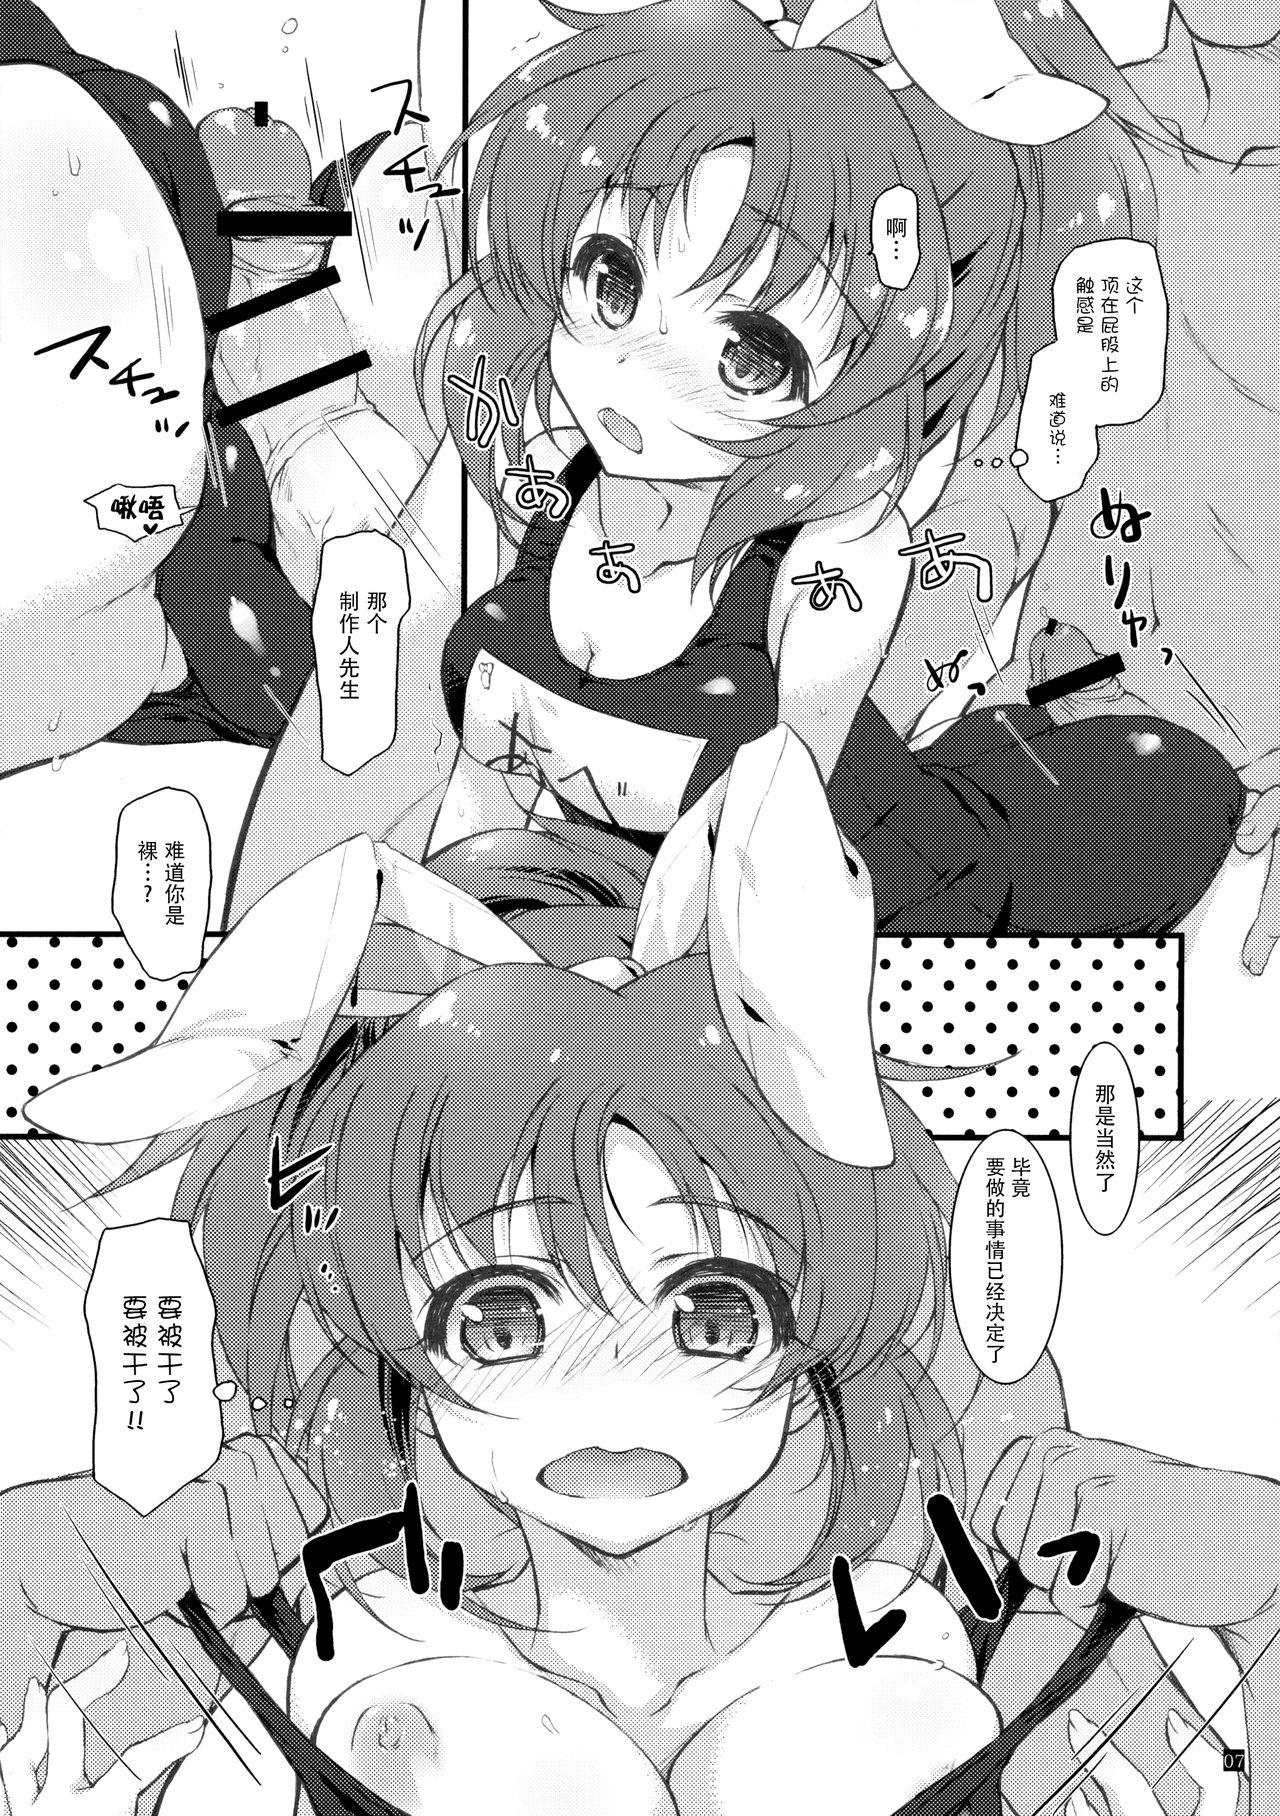 Topless JK to Pool - The idolmaster Uniform - Page 7